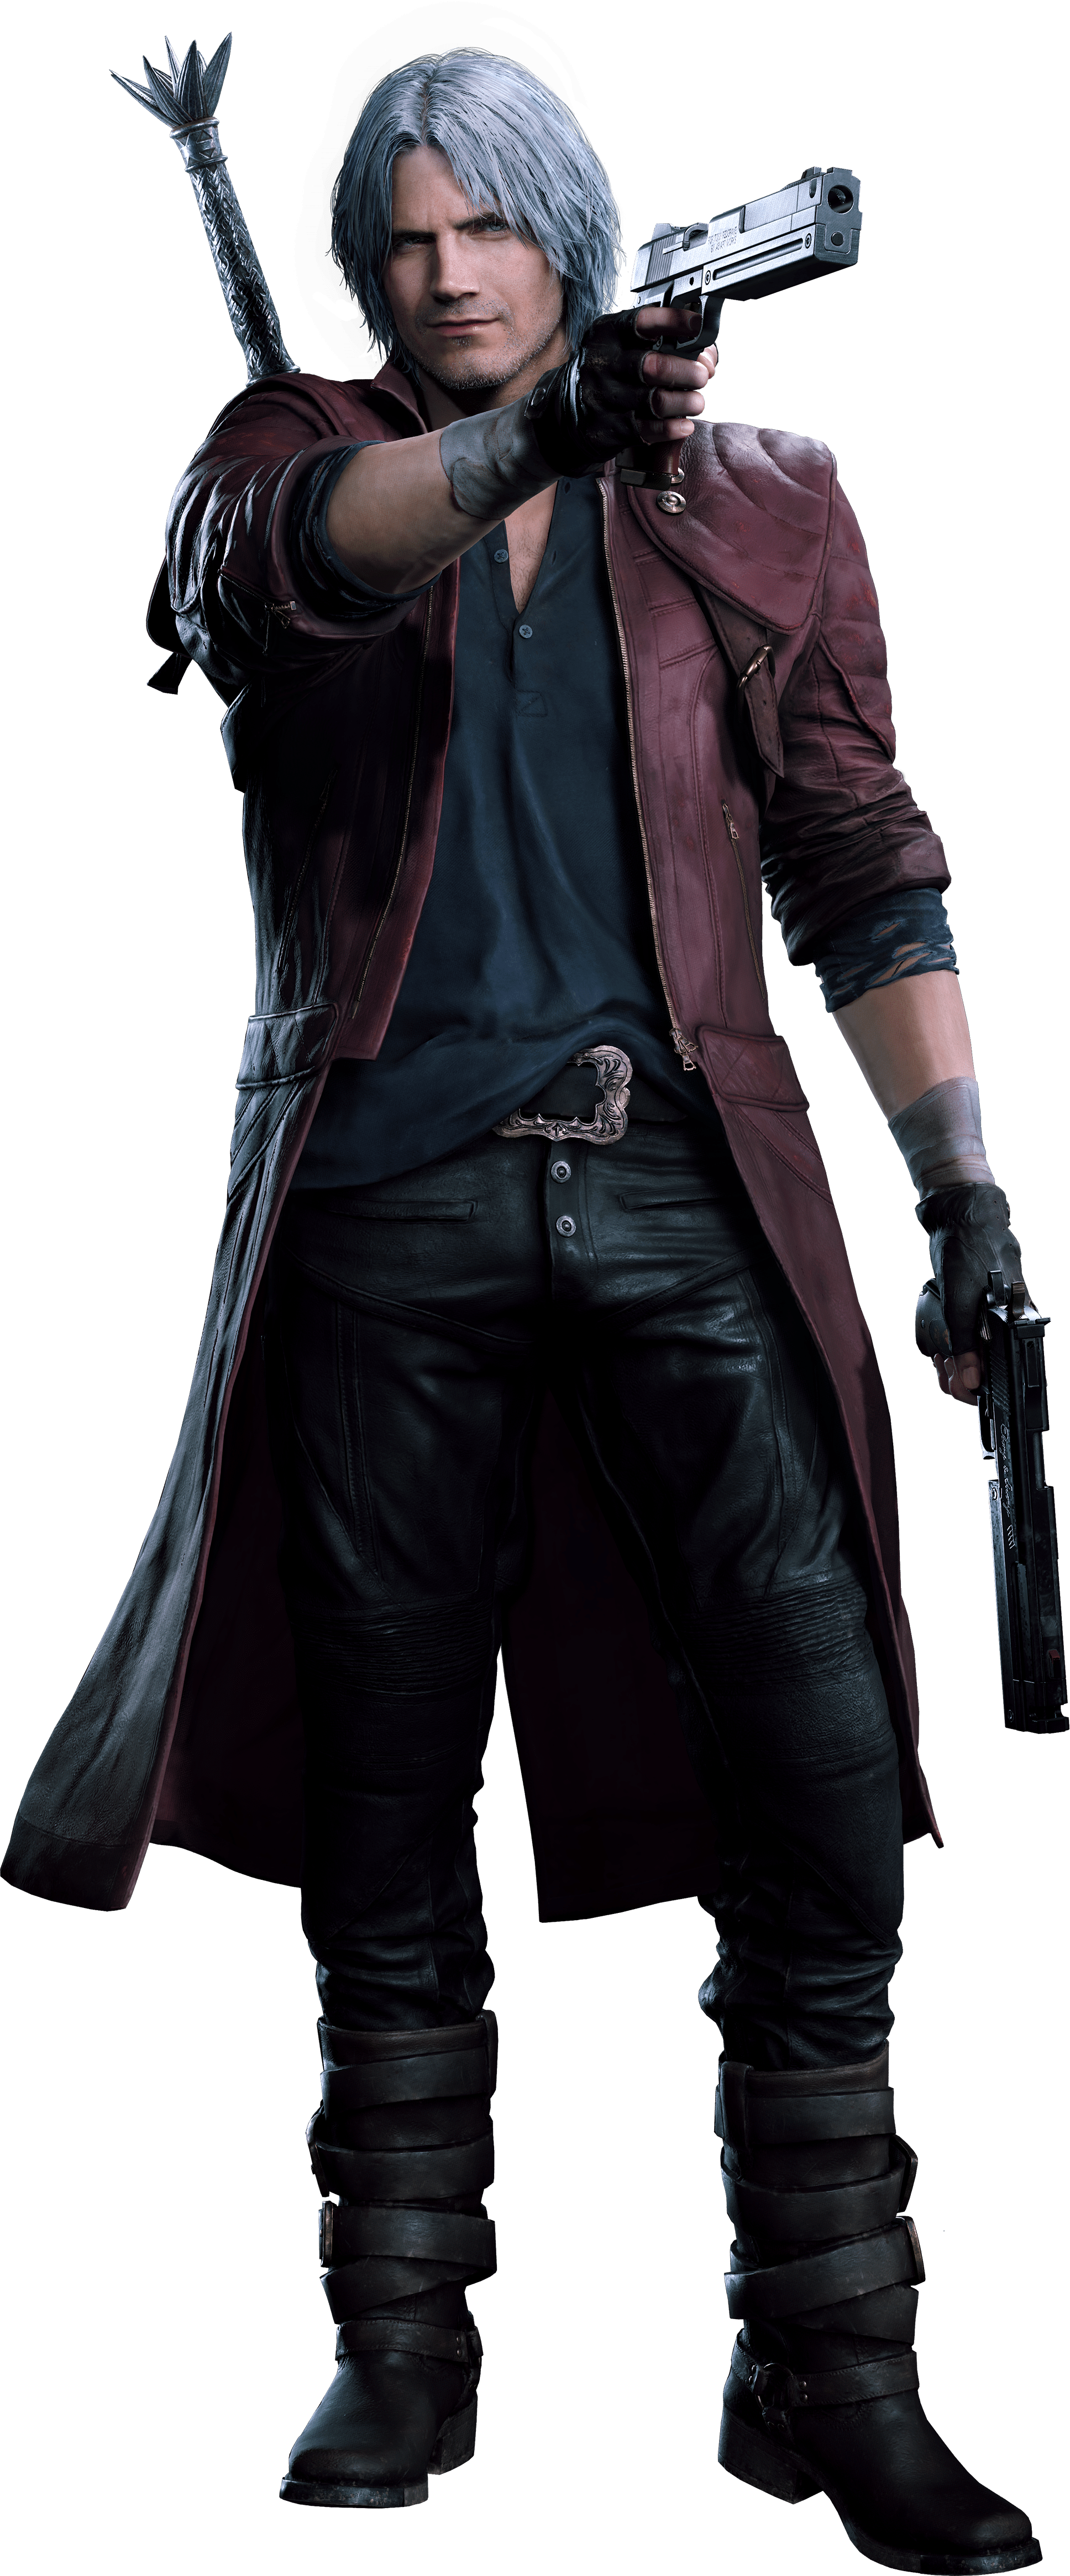 General 1936x4662 Devil May Cry Devil May Cry 5 Dante (Devil May Cry) video games video game characters